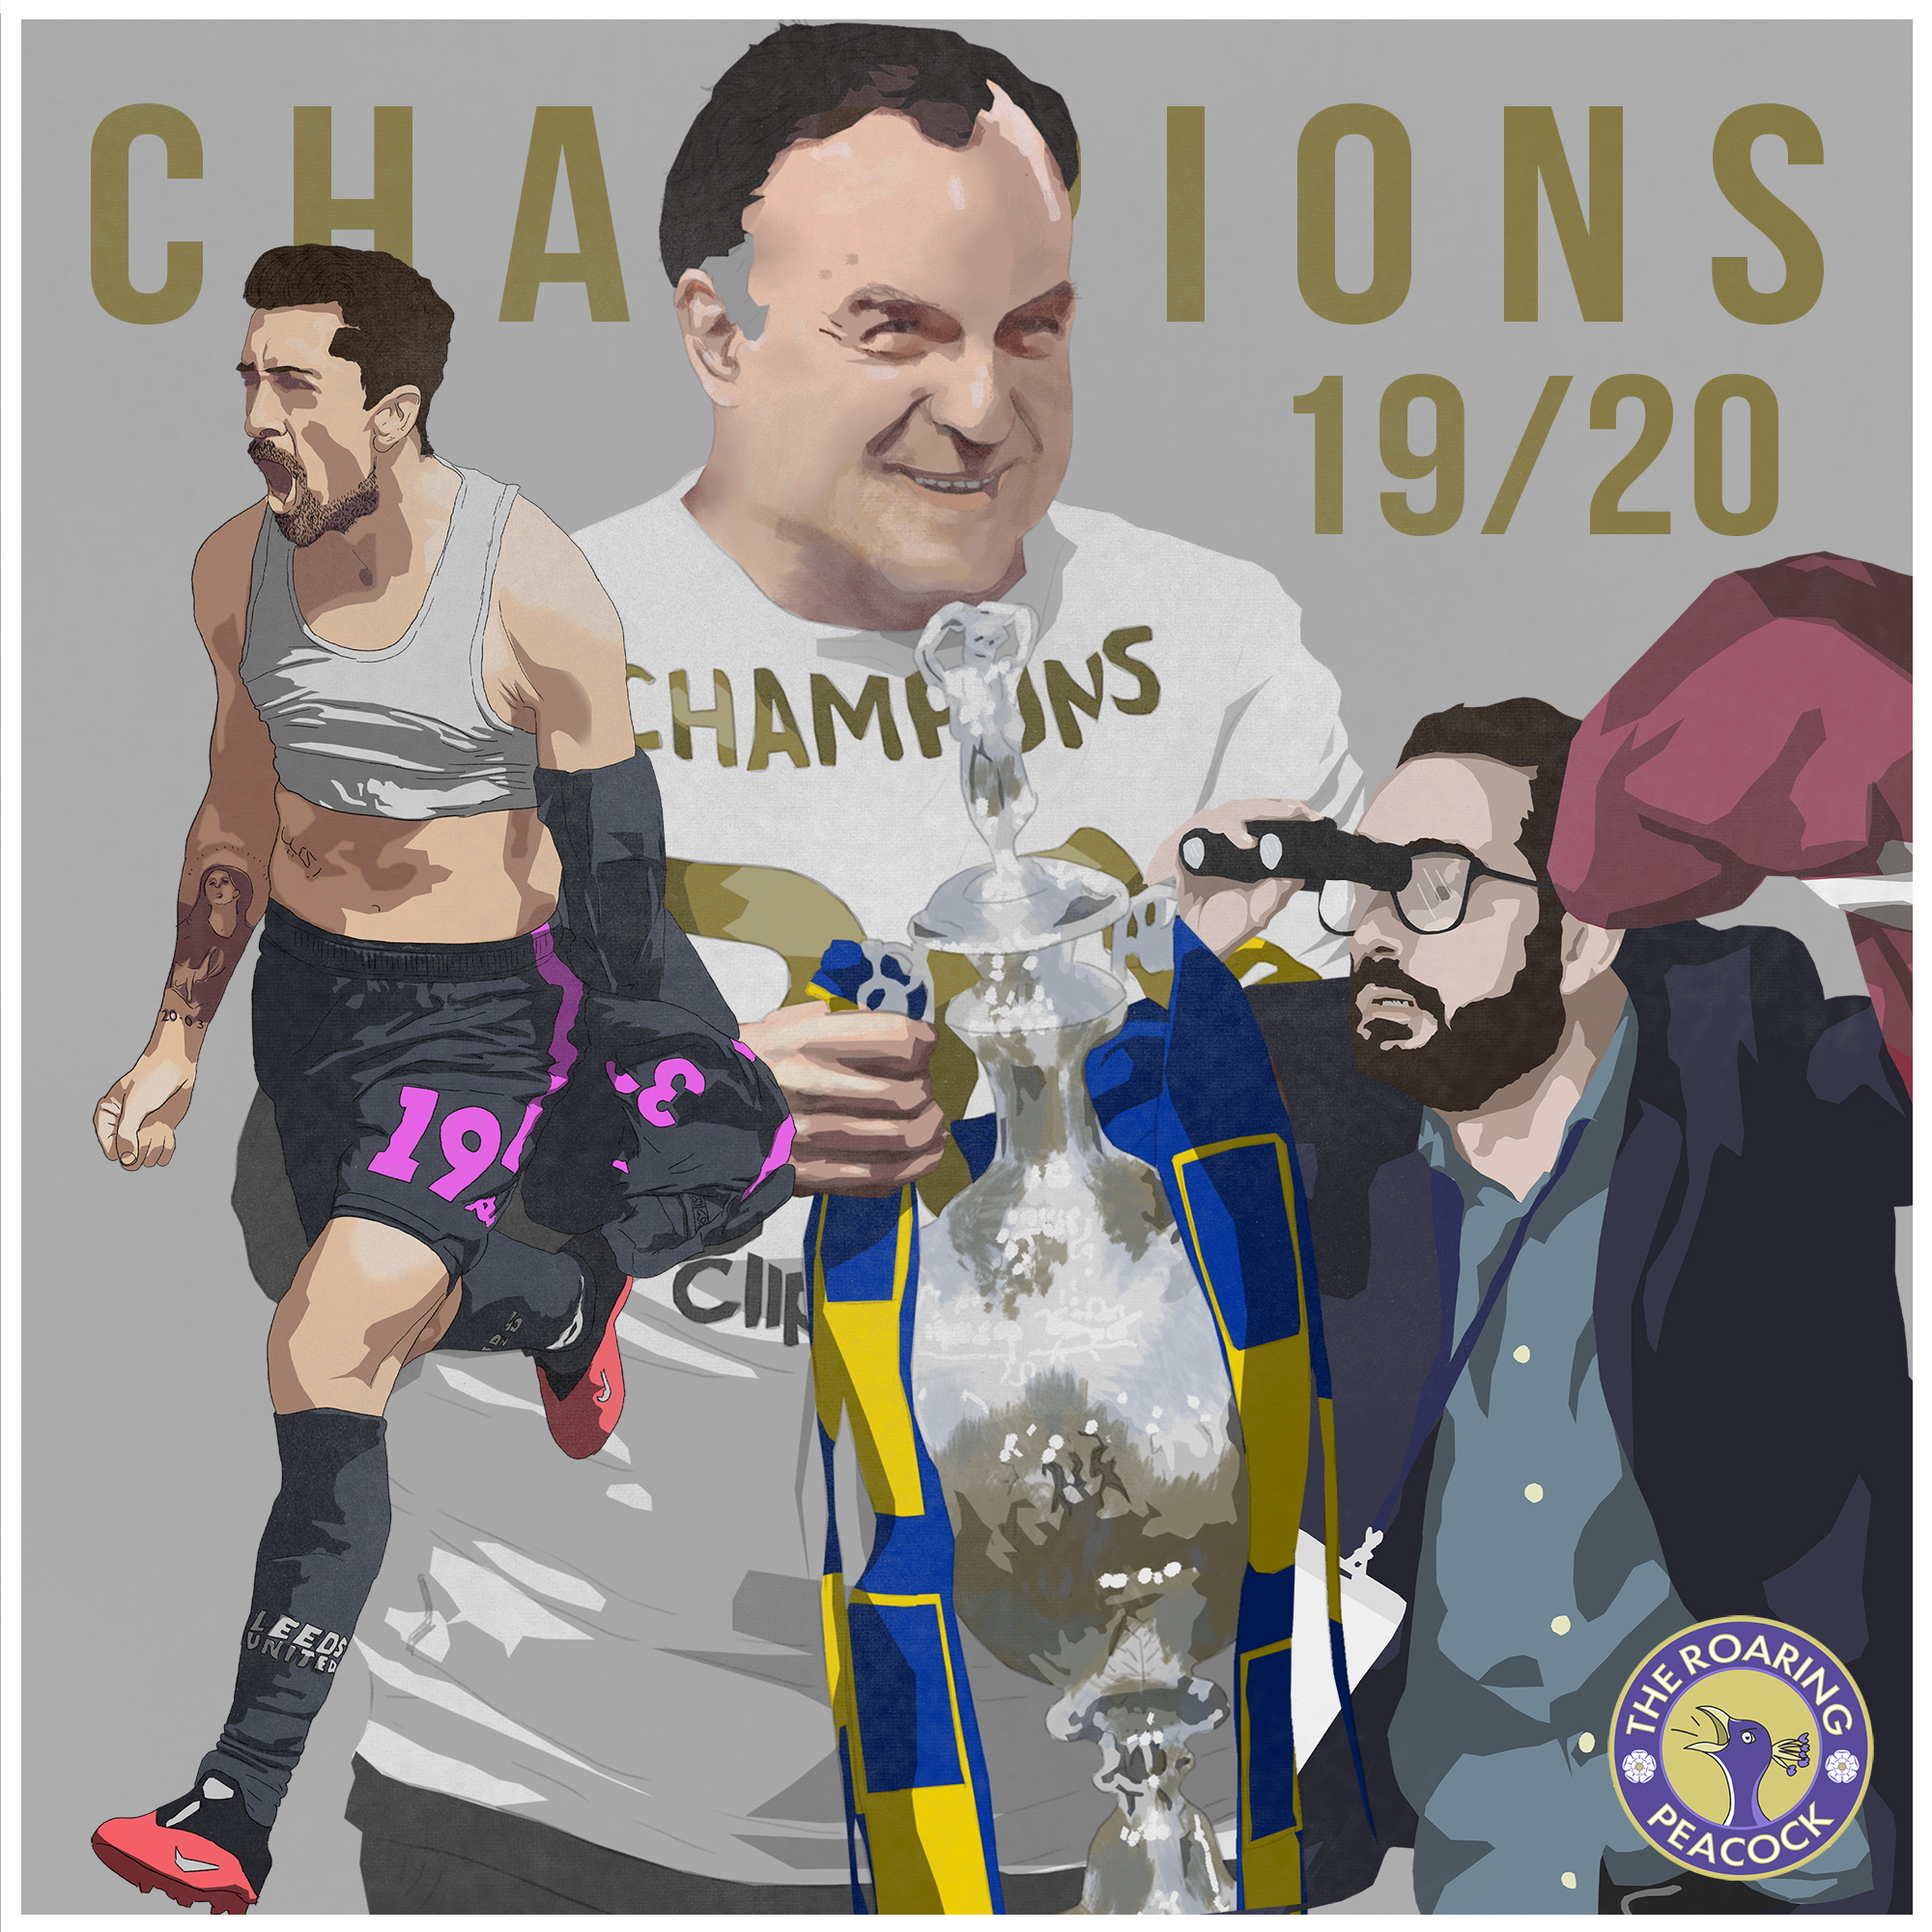 2019/20 Championship Champions | Leeds United Promotion Stories | Lockdown Special